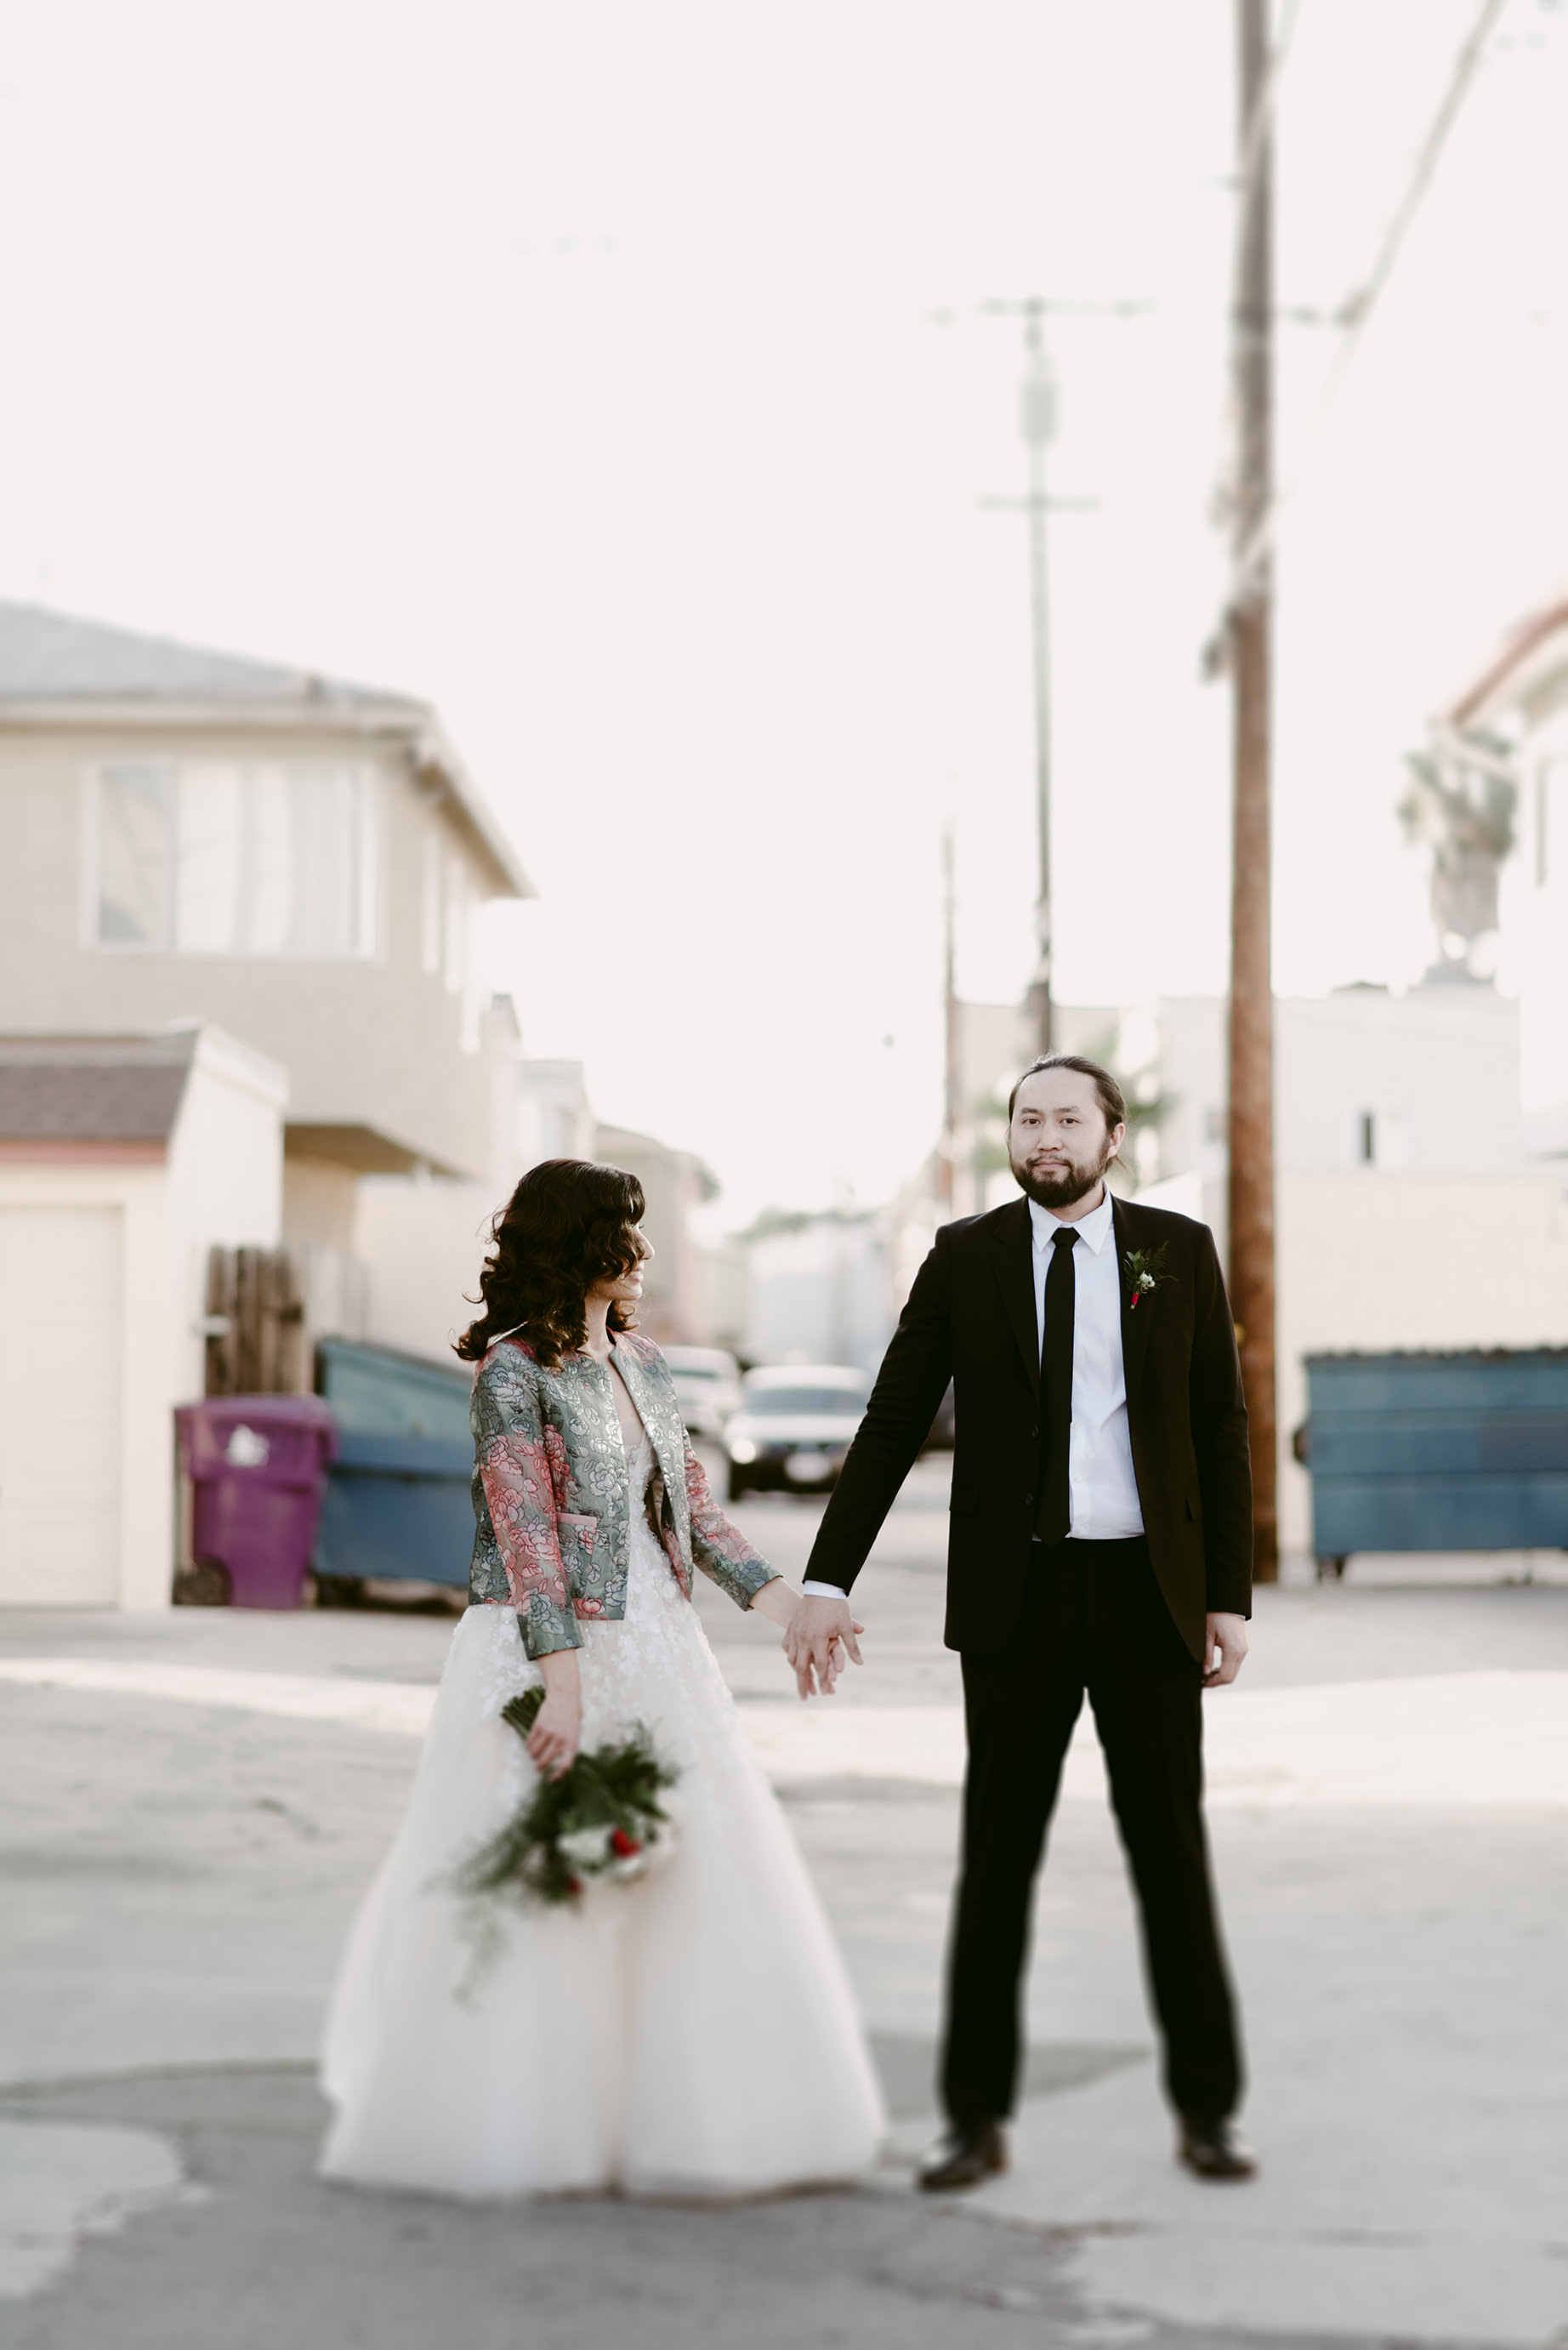 L+A // A Los Angeles Wedding at the Ebell – Julie Pepin Photography Blog